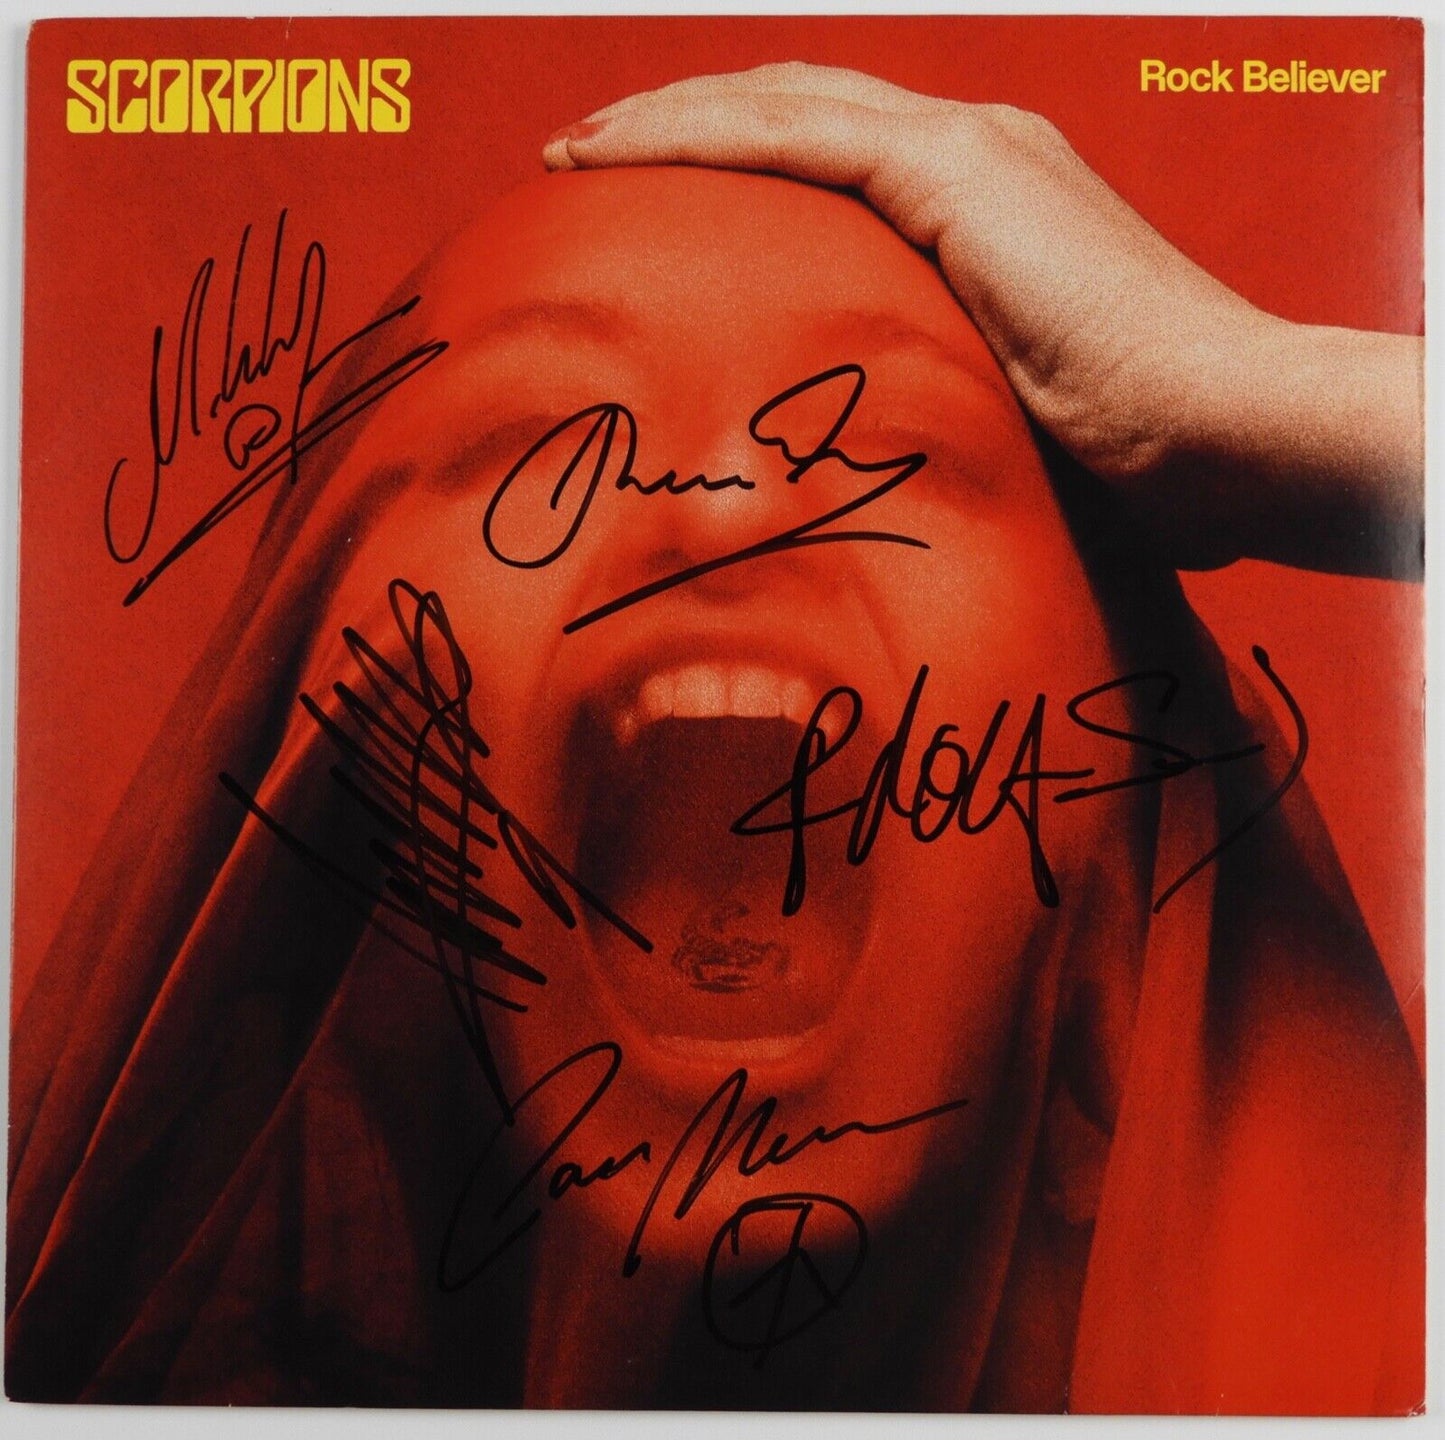 Scorpions Fully Signed Autograph Album Vinyl Record Rock Believer Epperson REAL & JSA